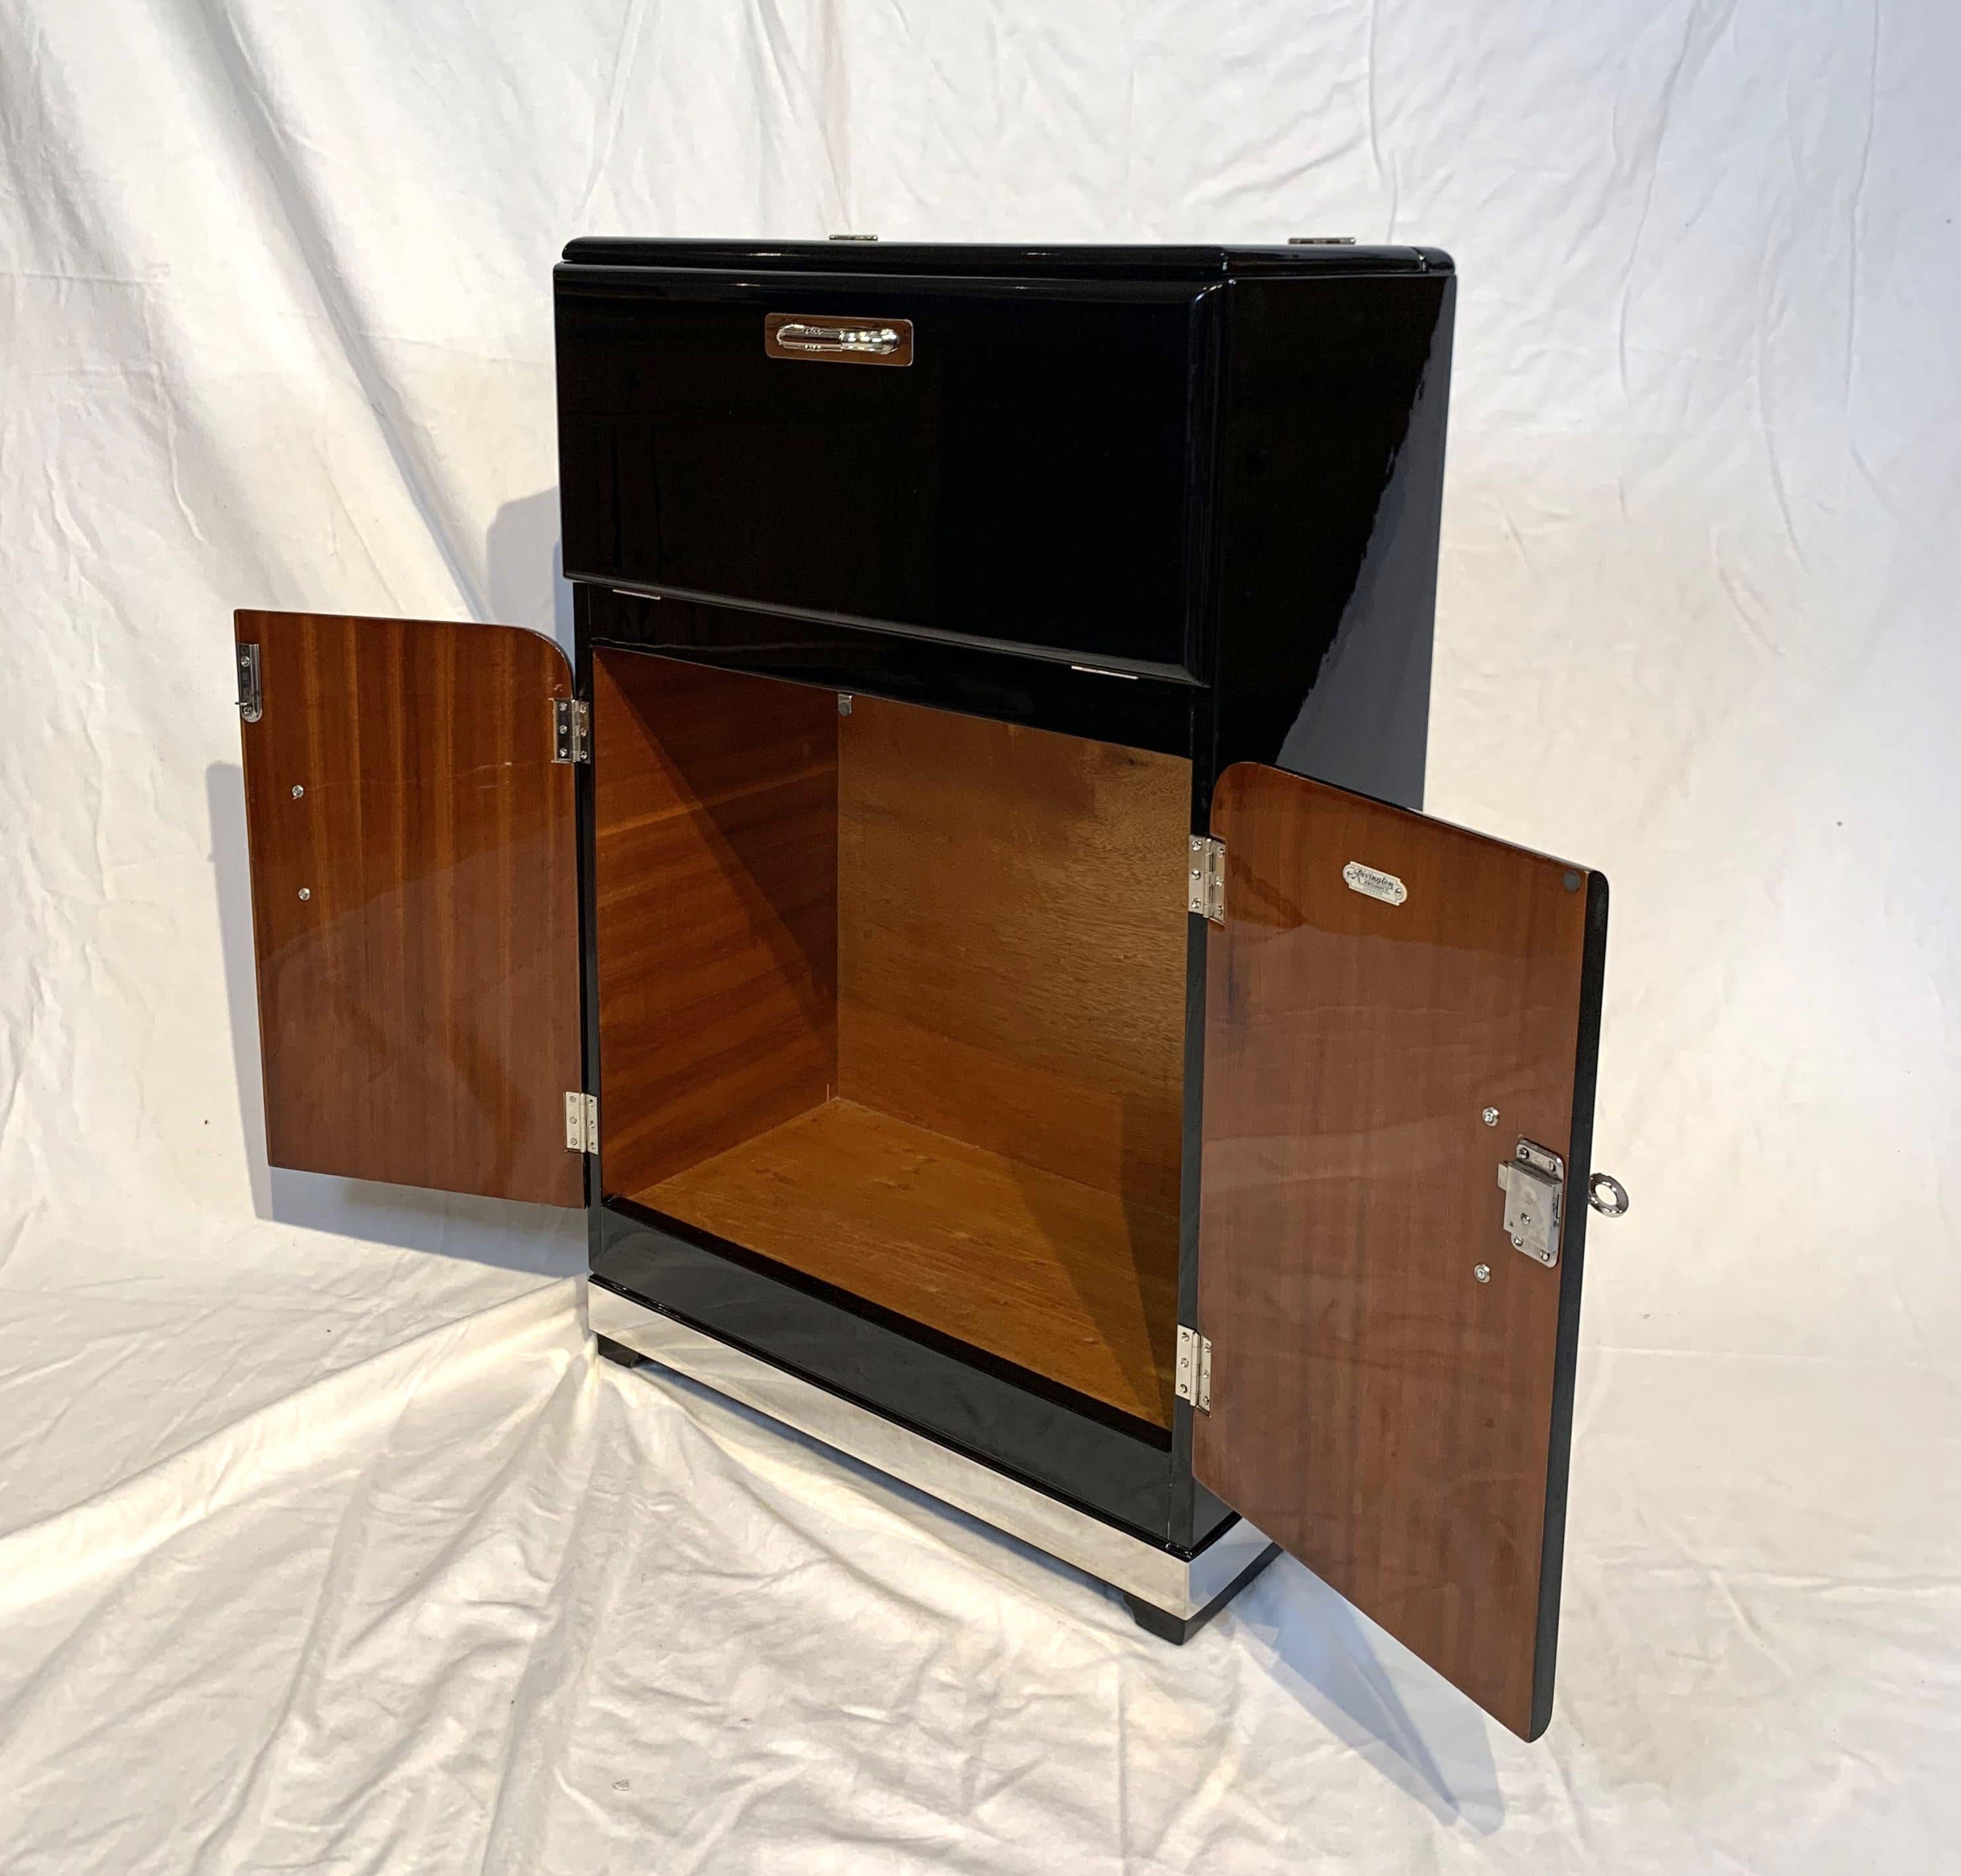 Galvanized Small Art Deco Bar Cabinet, Black Lacquer and Nickel, London, UK, 1930s